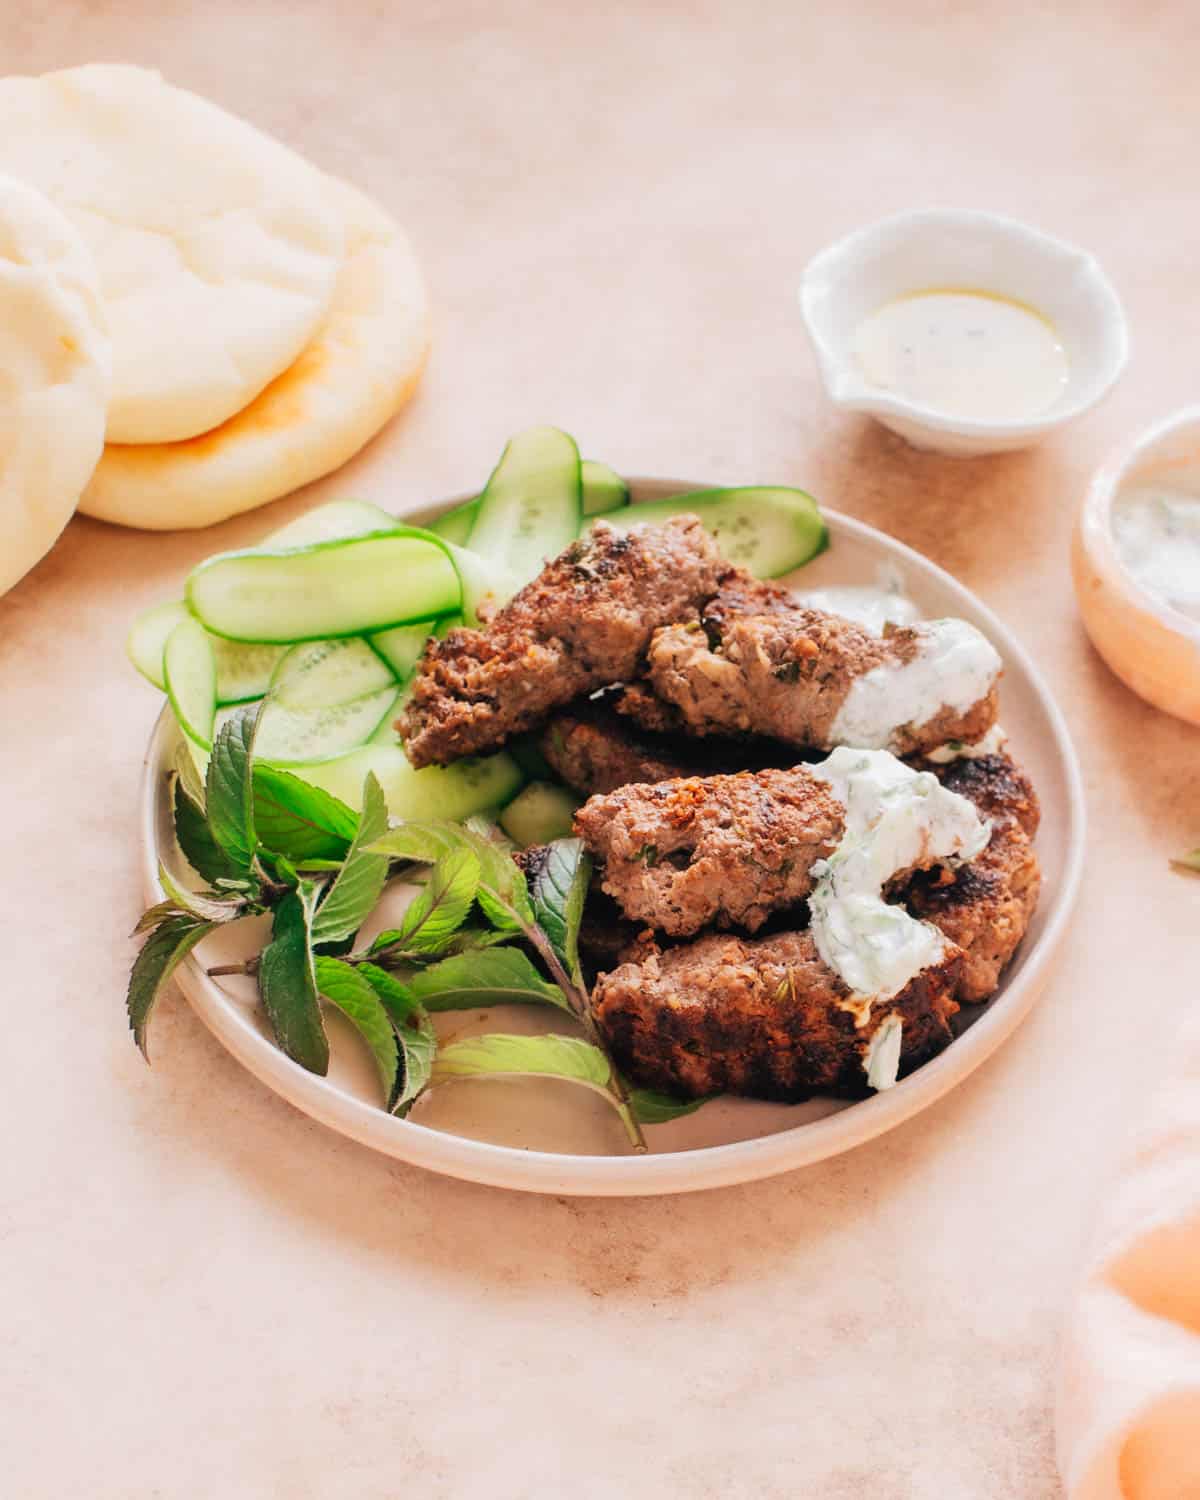 A plate of beef kafta kabobs with mint and sliced cucumber. Turkish bread is placed behind the plate.